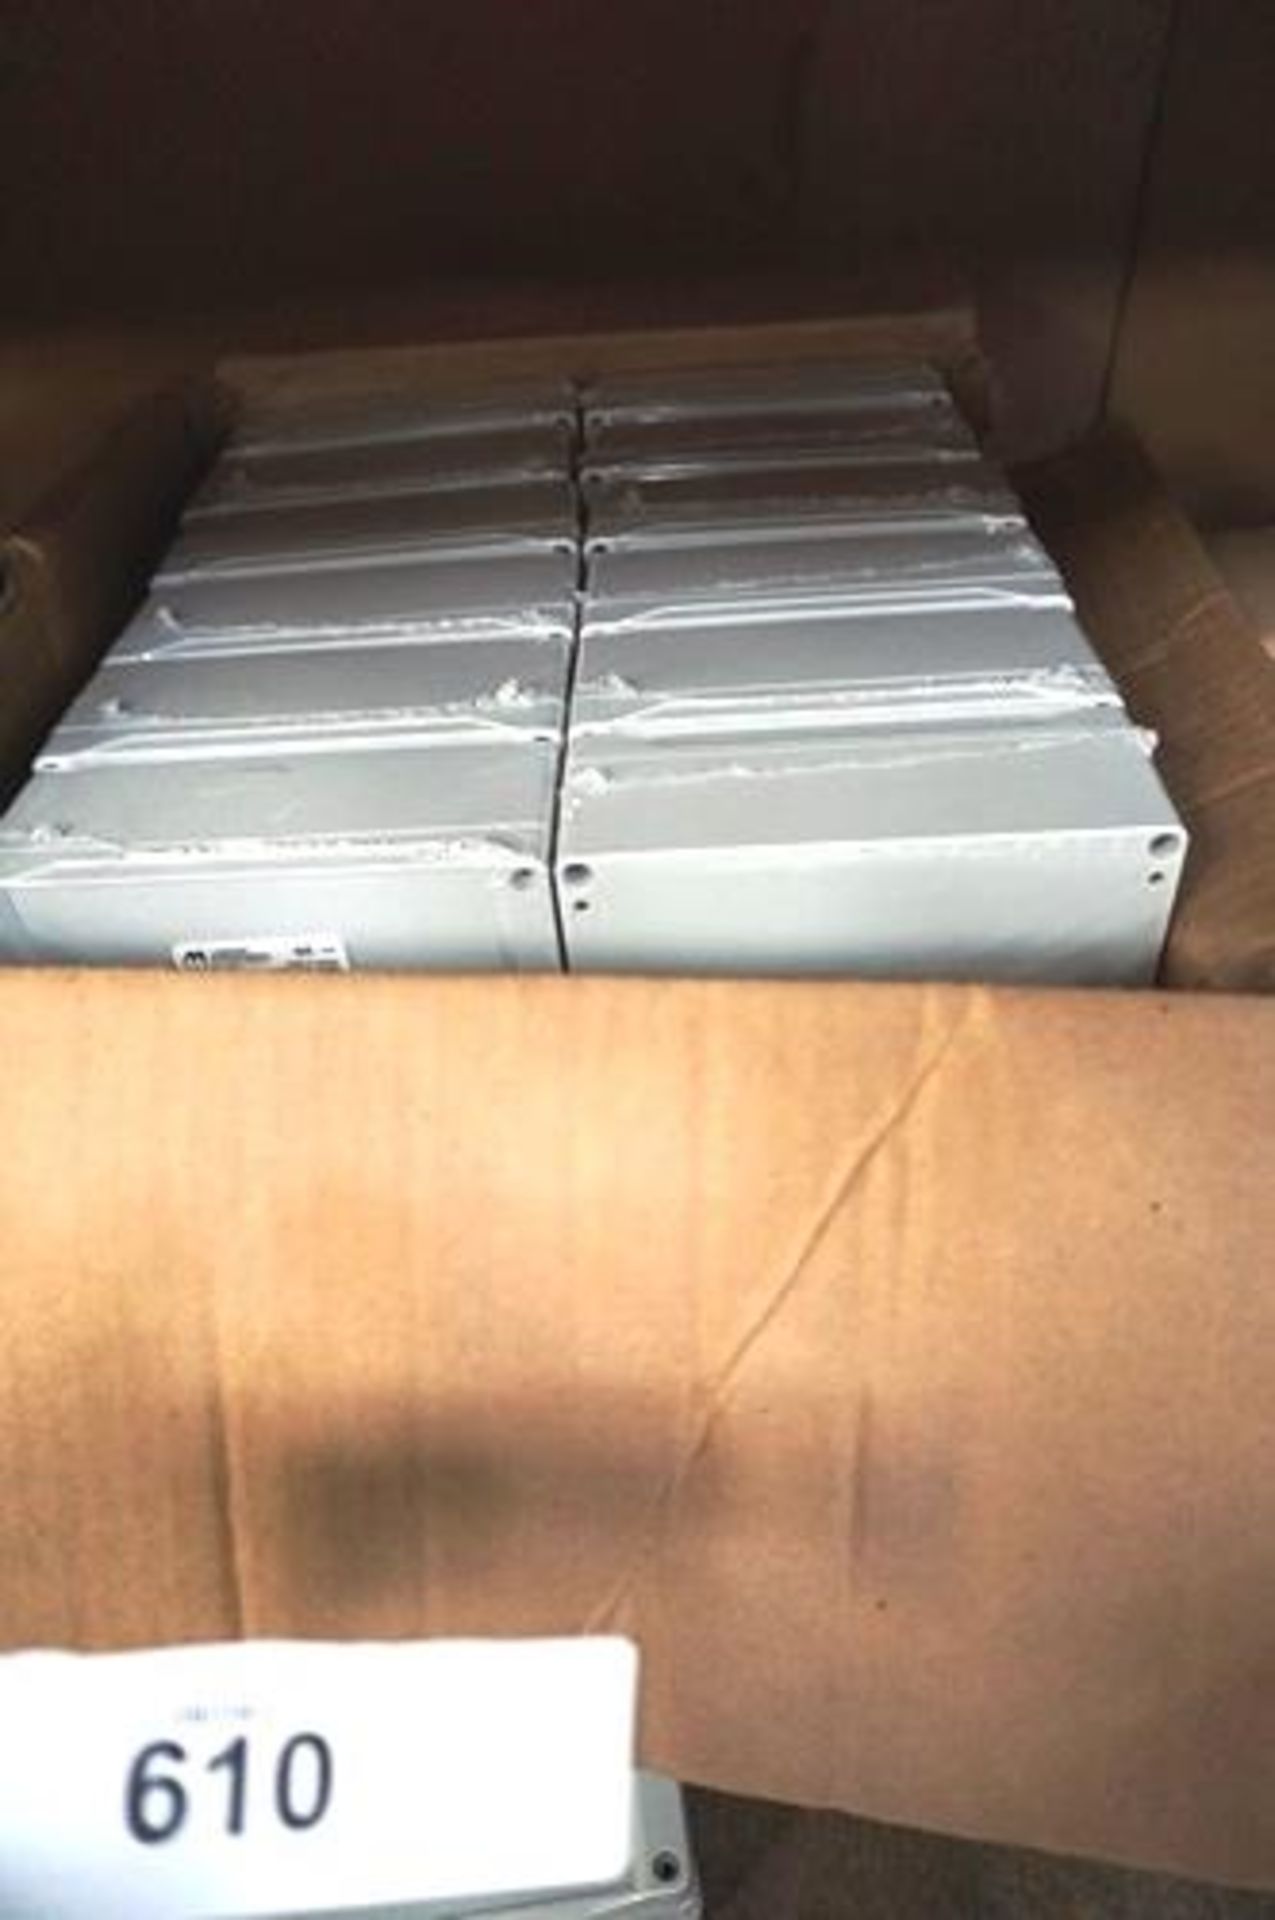 49 x Hammond Manufacturing polycarb grey plastic enclosures, model 1555J2GY - New (GS36B) - Image 2 of 2